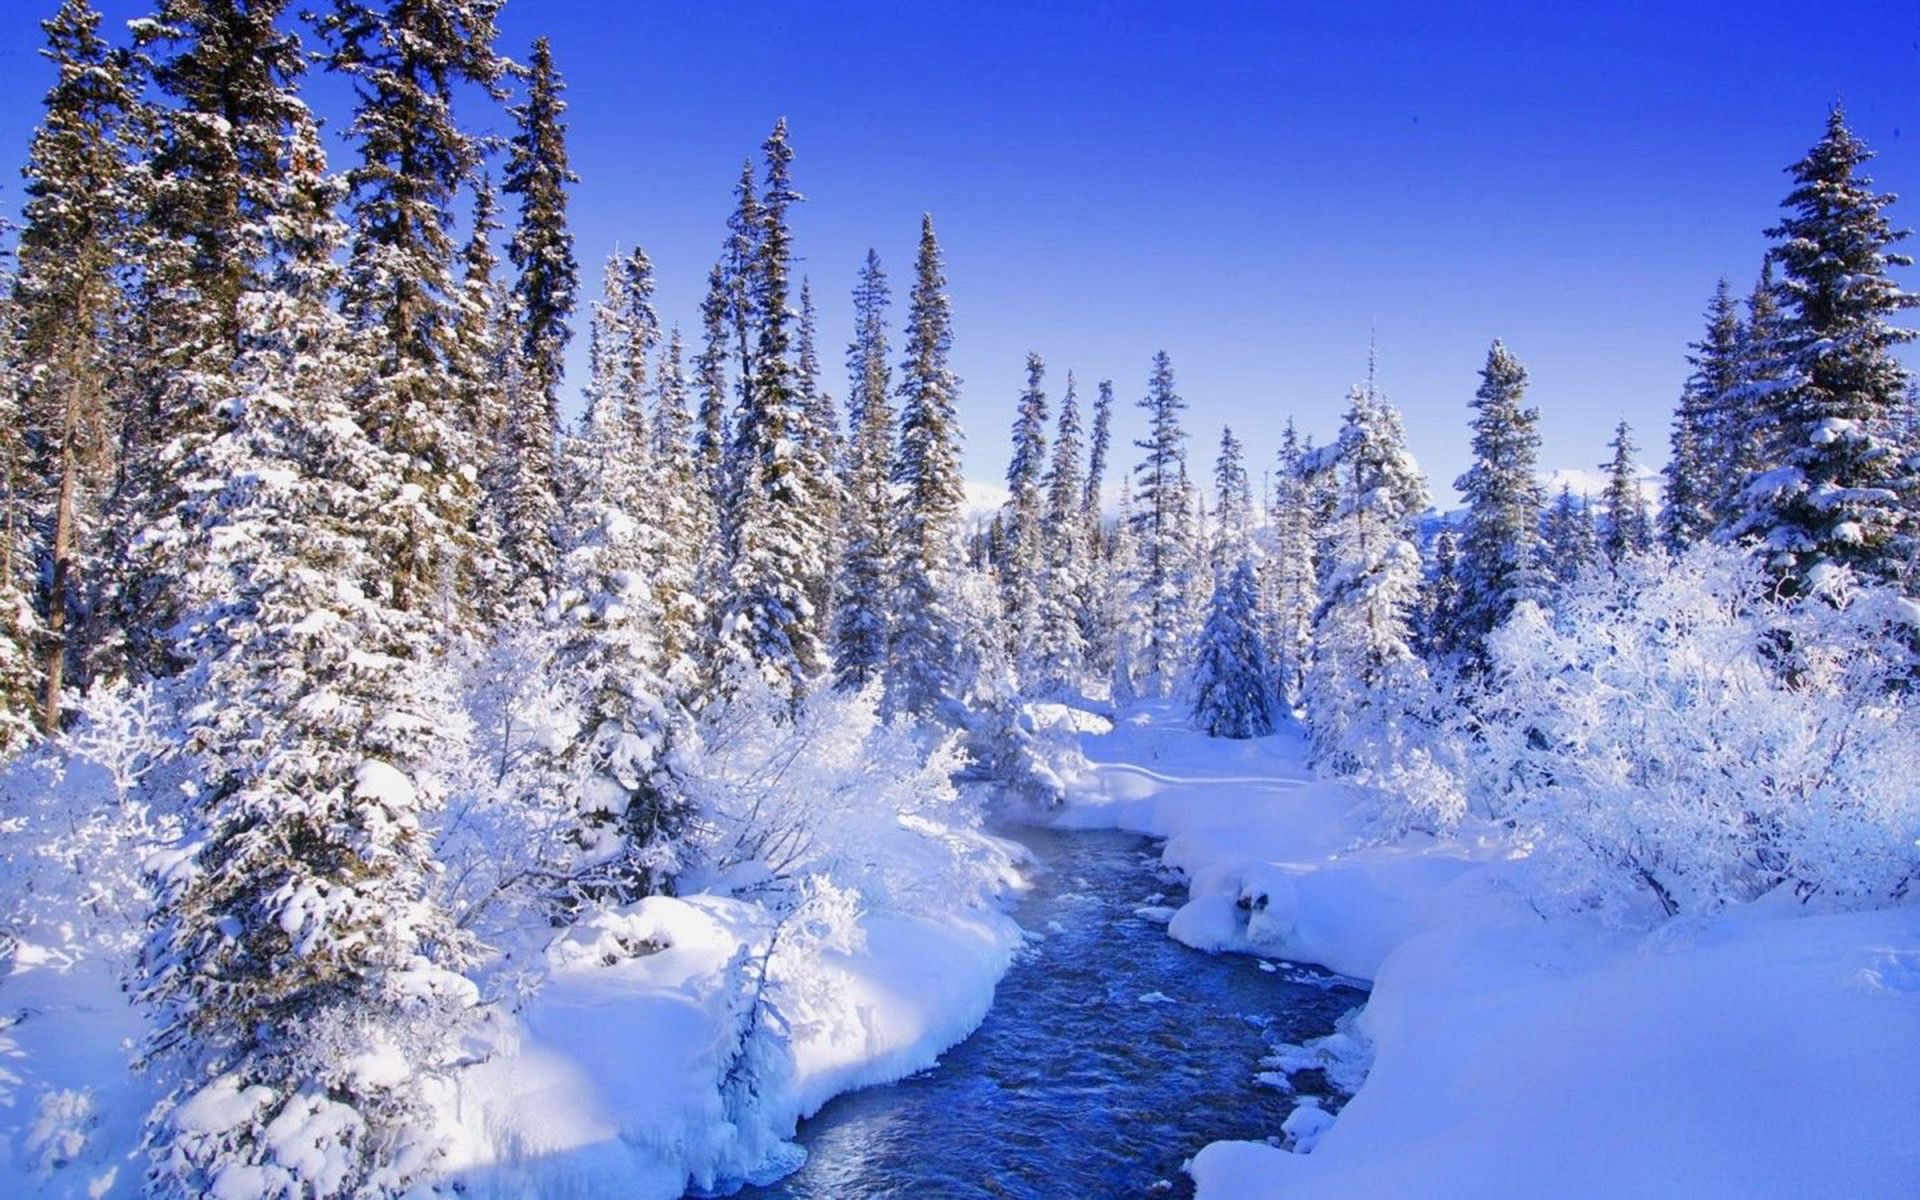 A river running through snow covered trees - Snow, ice, winter